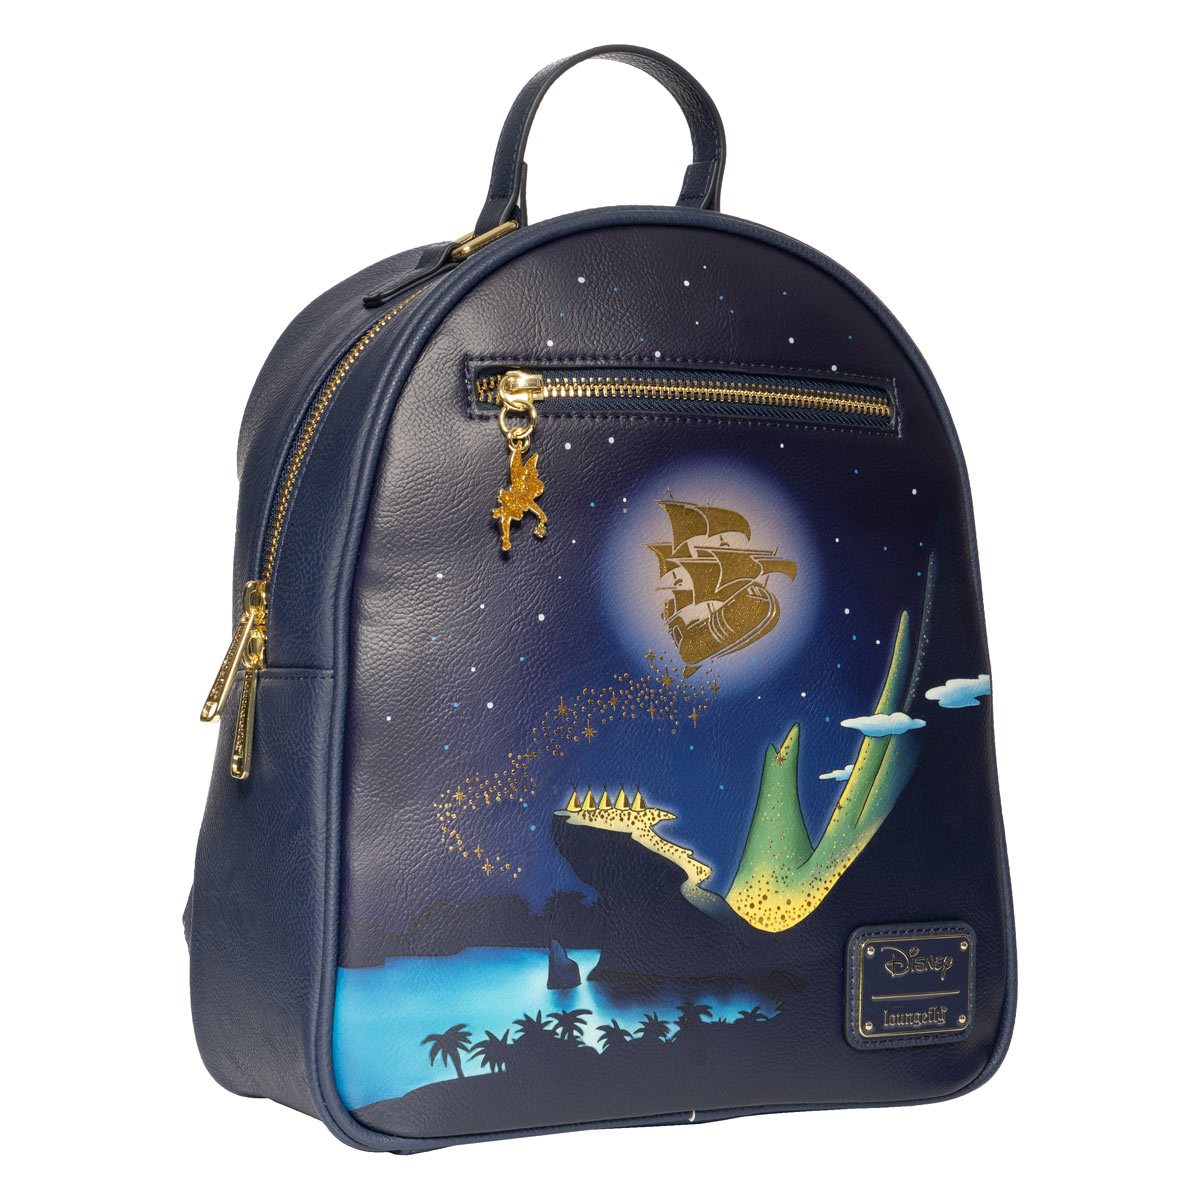 Peter Pan: Book Series Loungefly Convertible Backpack